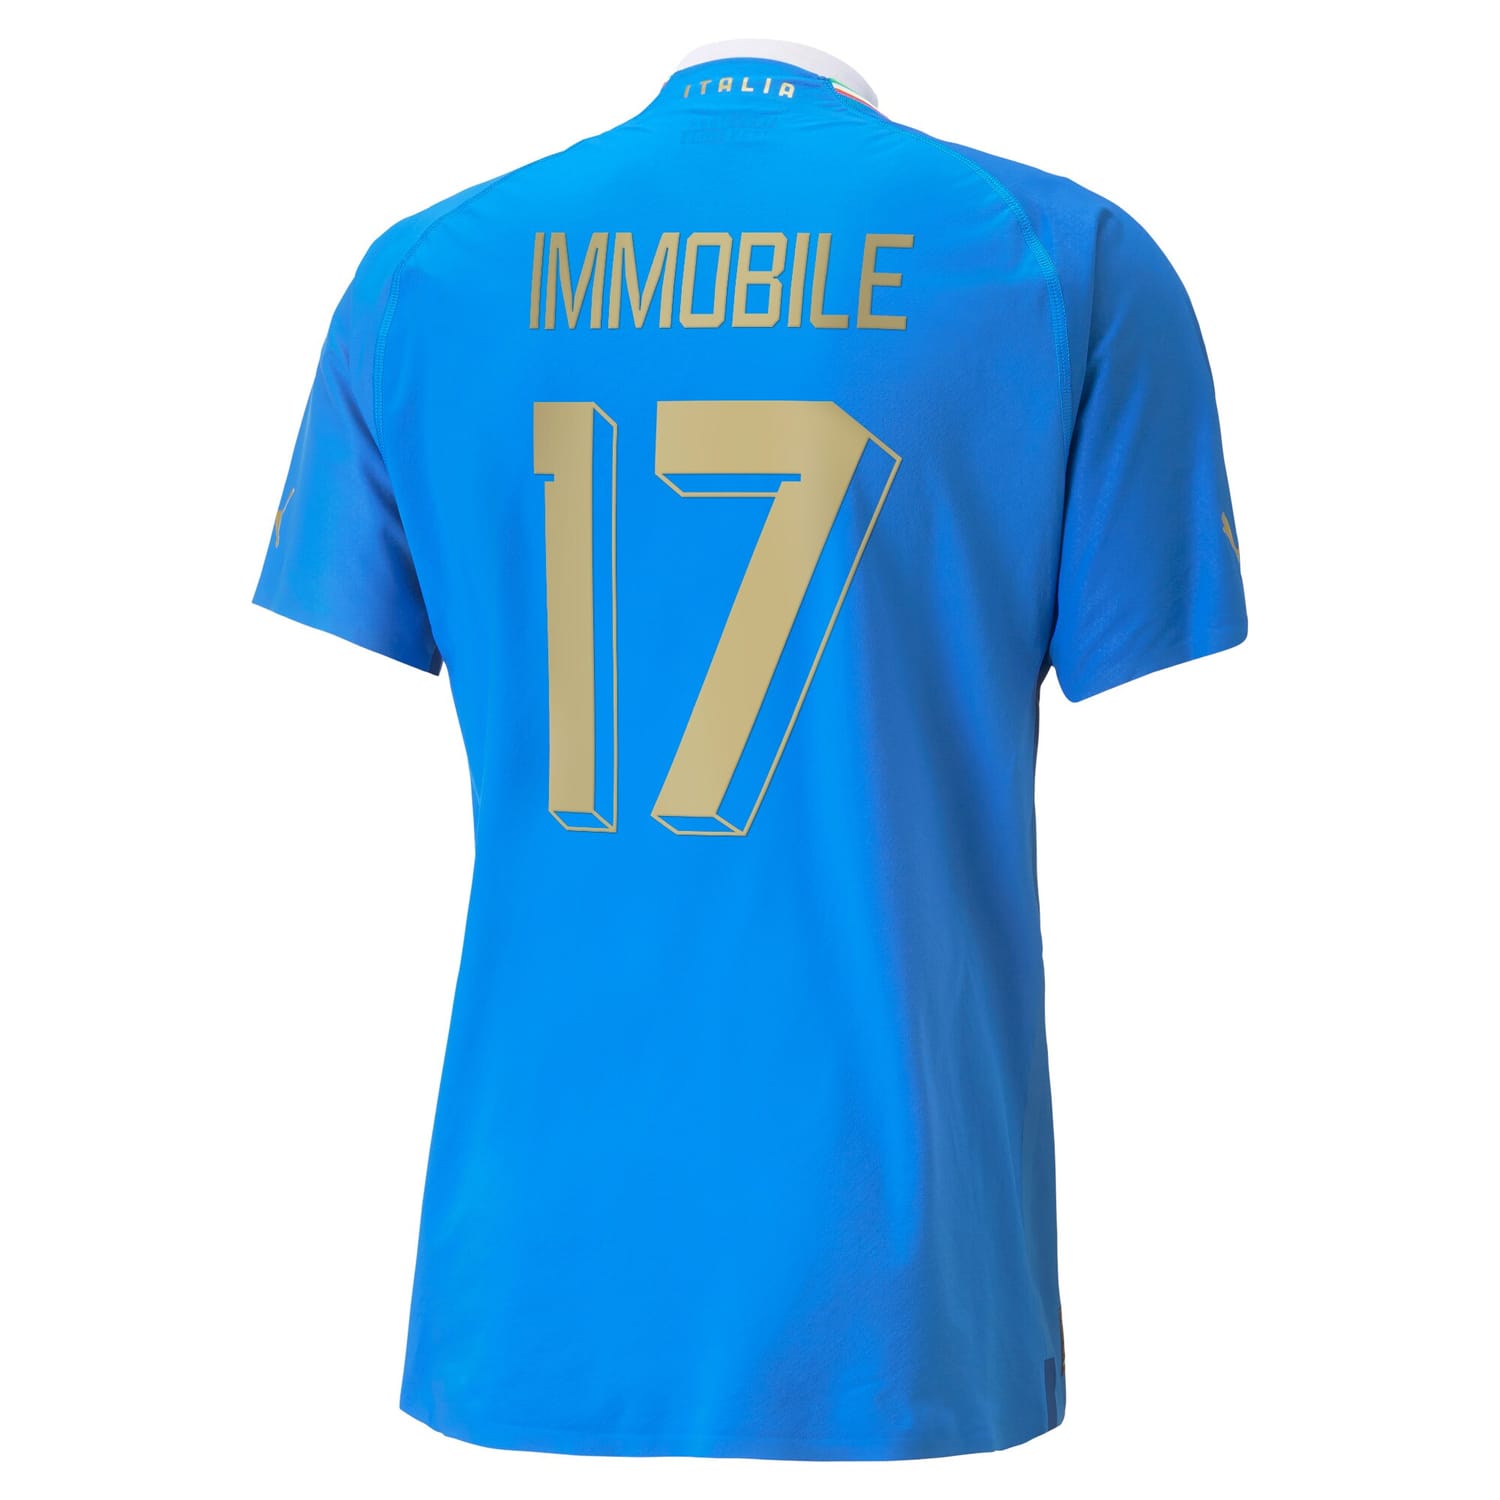 Italy National Team Home Authentic Jersey Shirt player Ciro Immobile 17 printing for Men